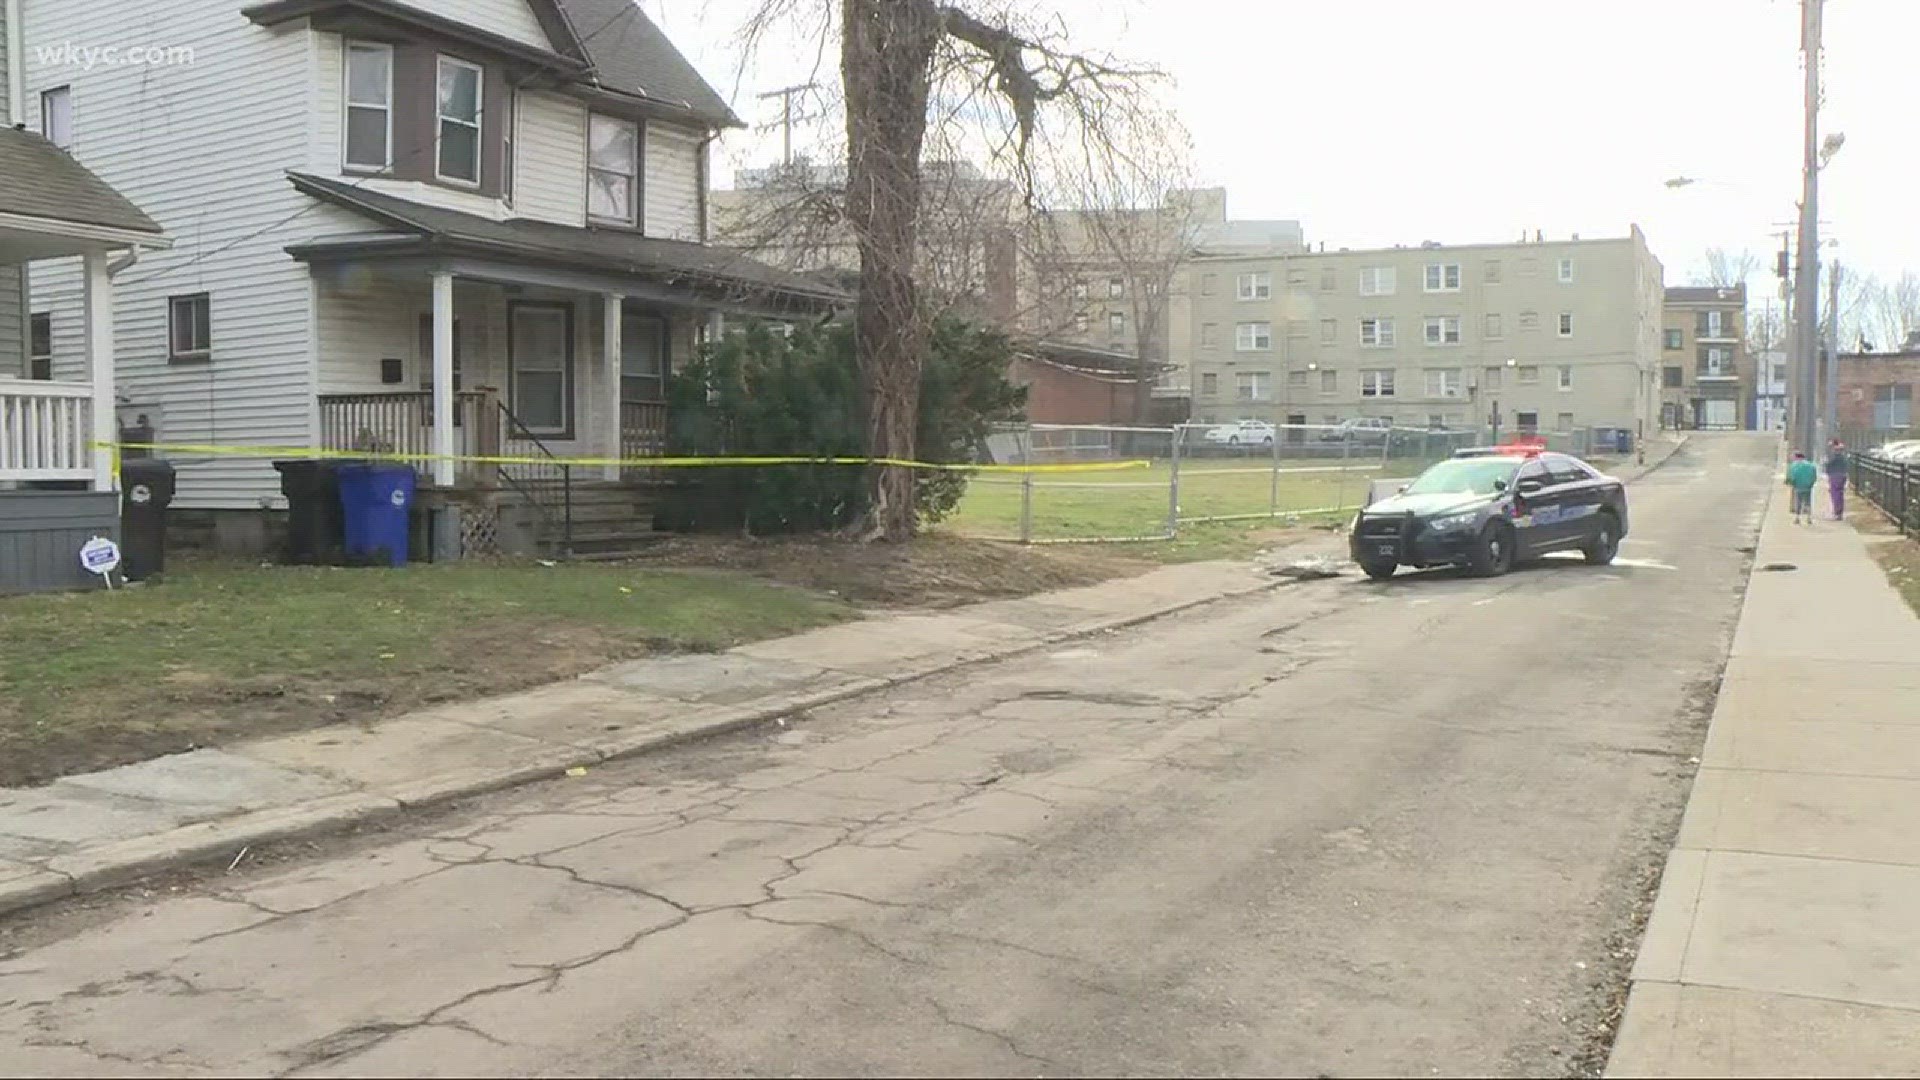 Residents shocked at news of human remains found in west side neighborhood